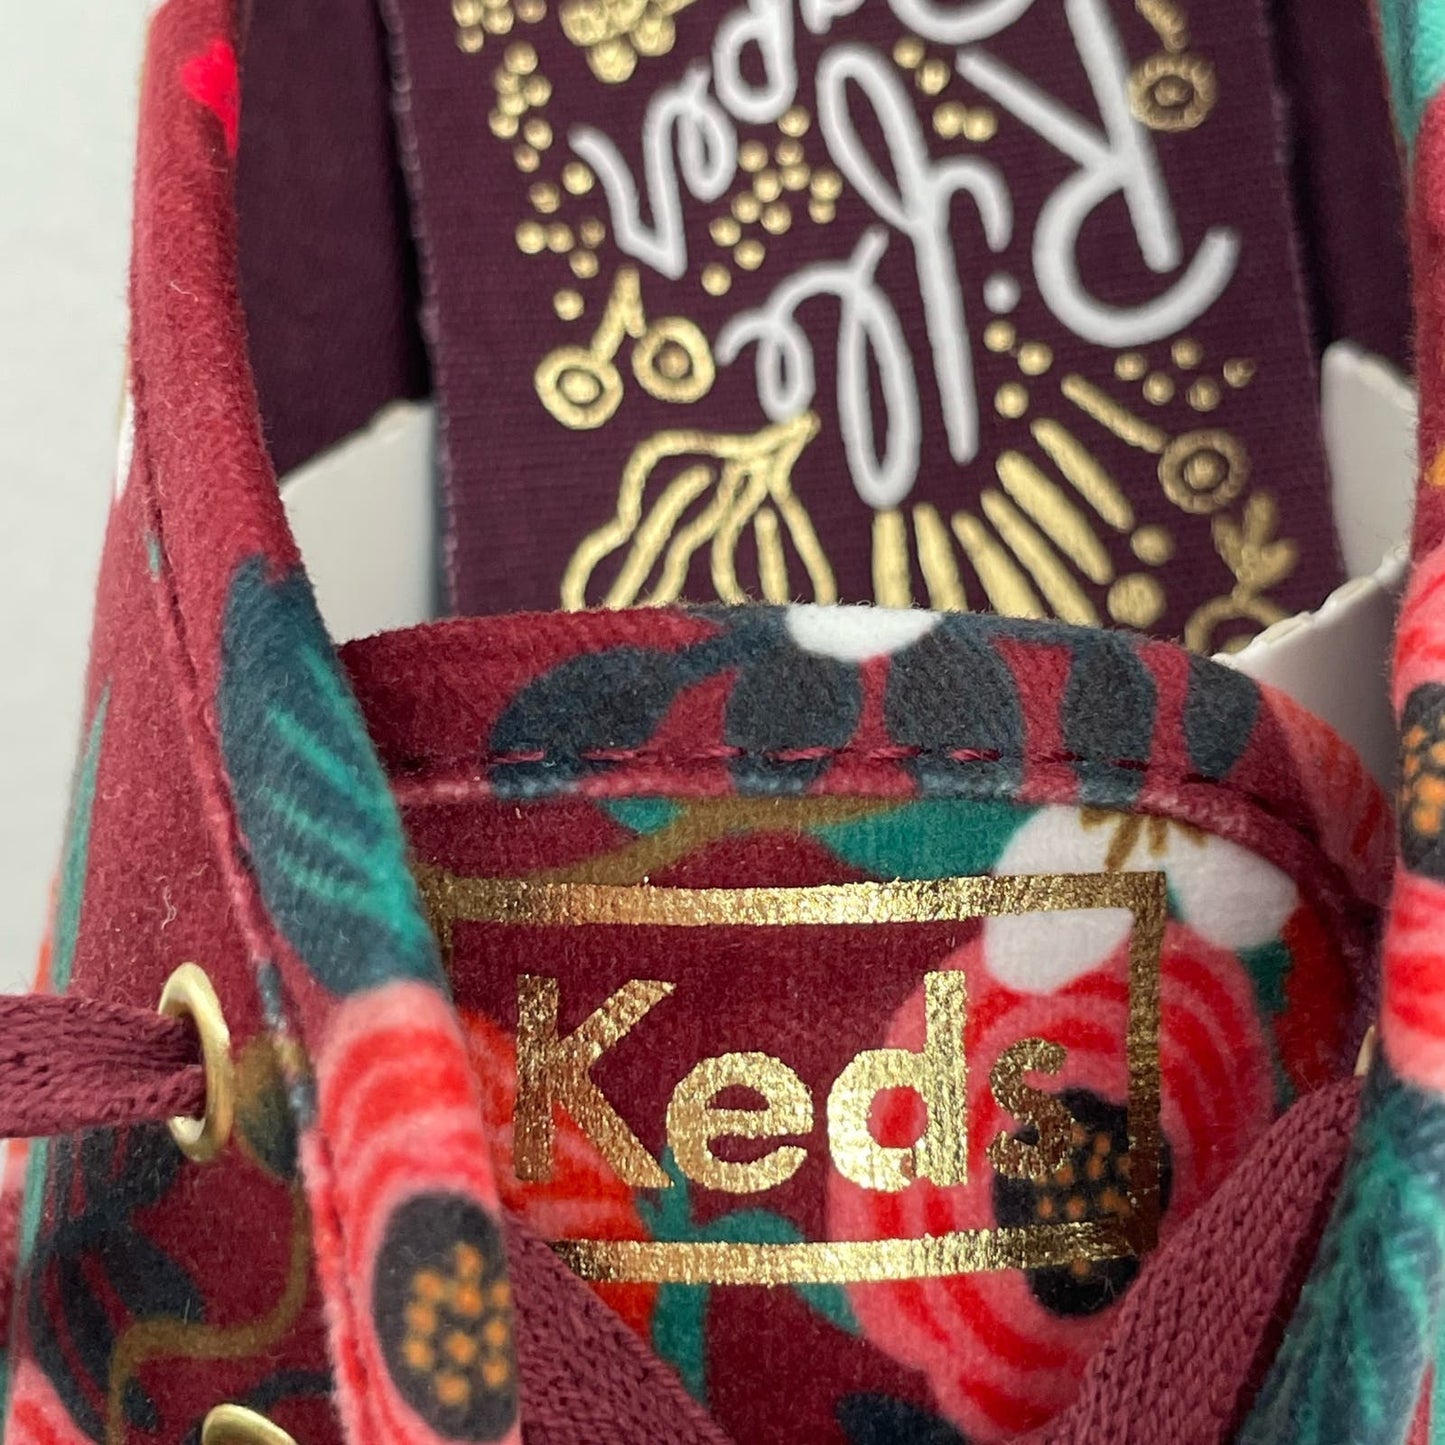 NEW Keds X Rifle Paper Co Sneakers Red Velvet Floral Garden Fall Flats Shoes Size 8.5